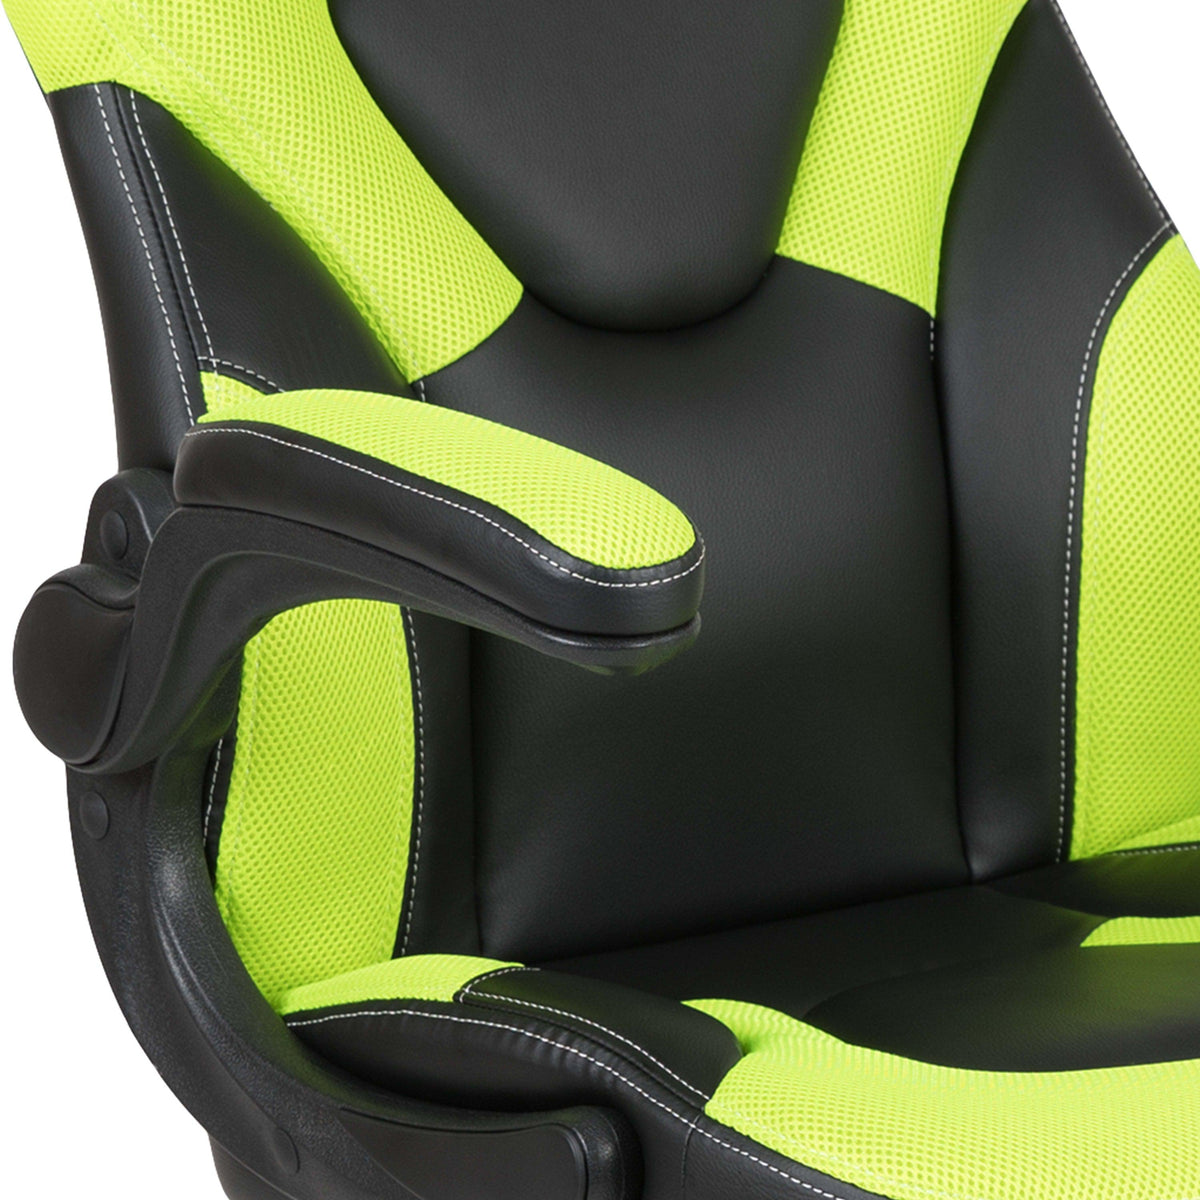 Neon Green |#| Ergonomic Neon Green and Black Computer Gaming Chair with Padded Flip-Up Arms